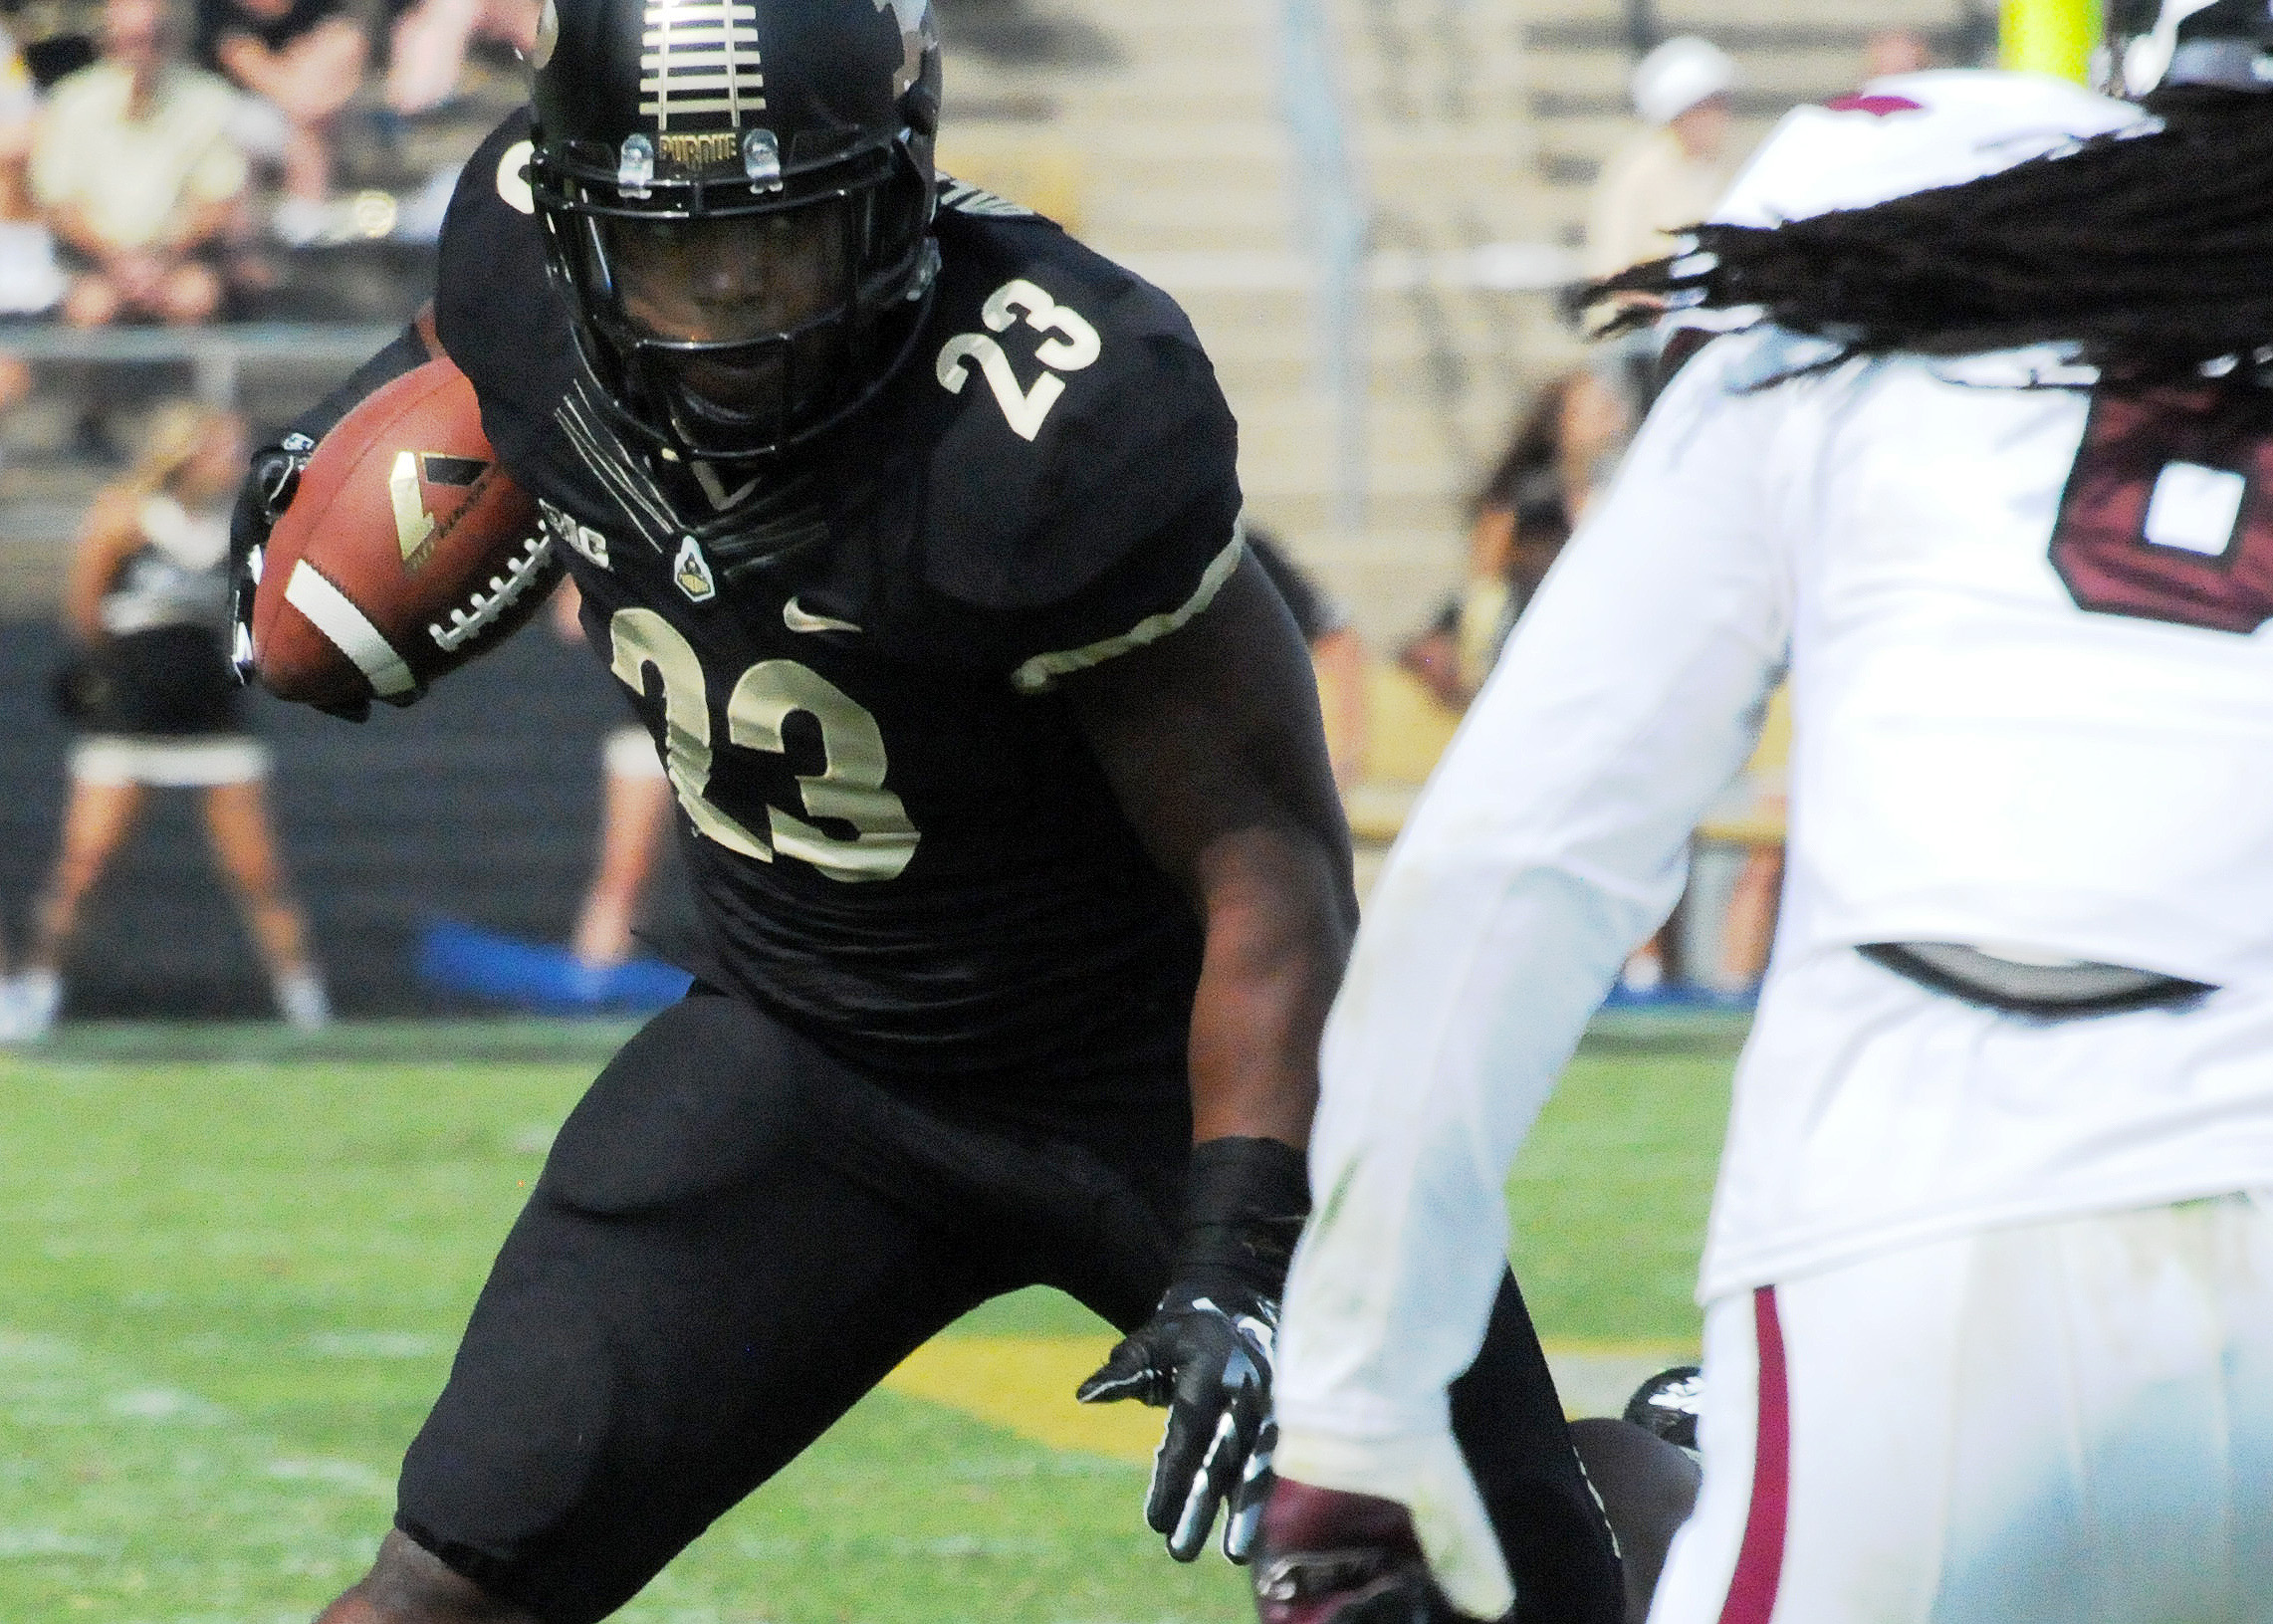 Purdue running back Keyante Green rushes against Southern Illinois.